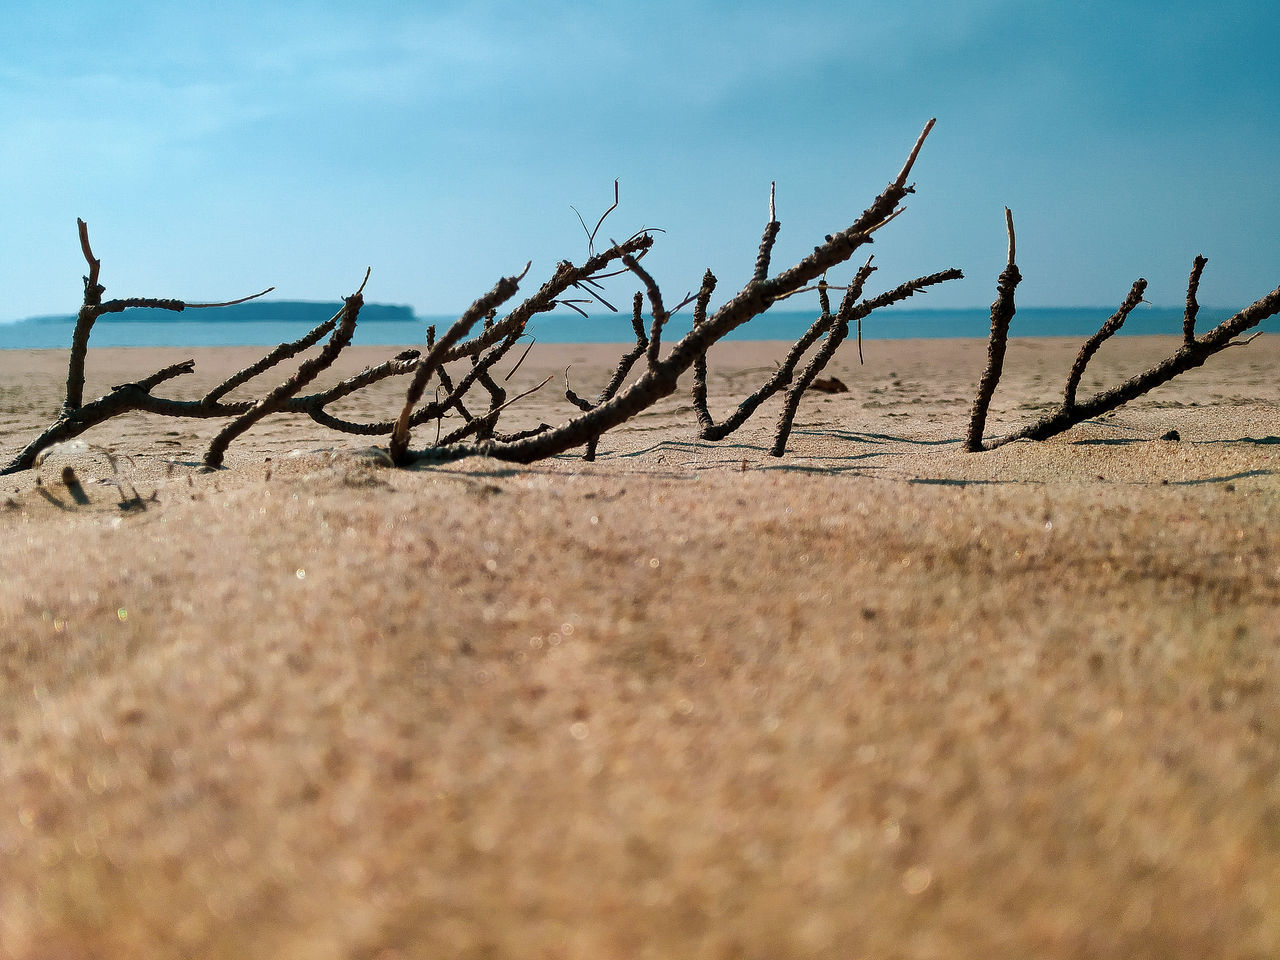 land, sand, nature, sky, day, selective focus, beach, tranquility, beauty in nature, scenics - nature, no people, tranquil scene, outdoors, close-up, sunlight, sea, landscape, branch, plant, non-urban scene, arid climate, climate, surface level, driftwood